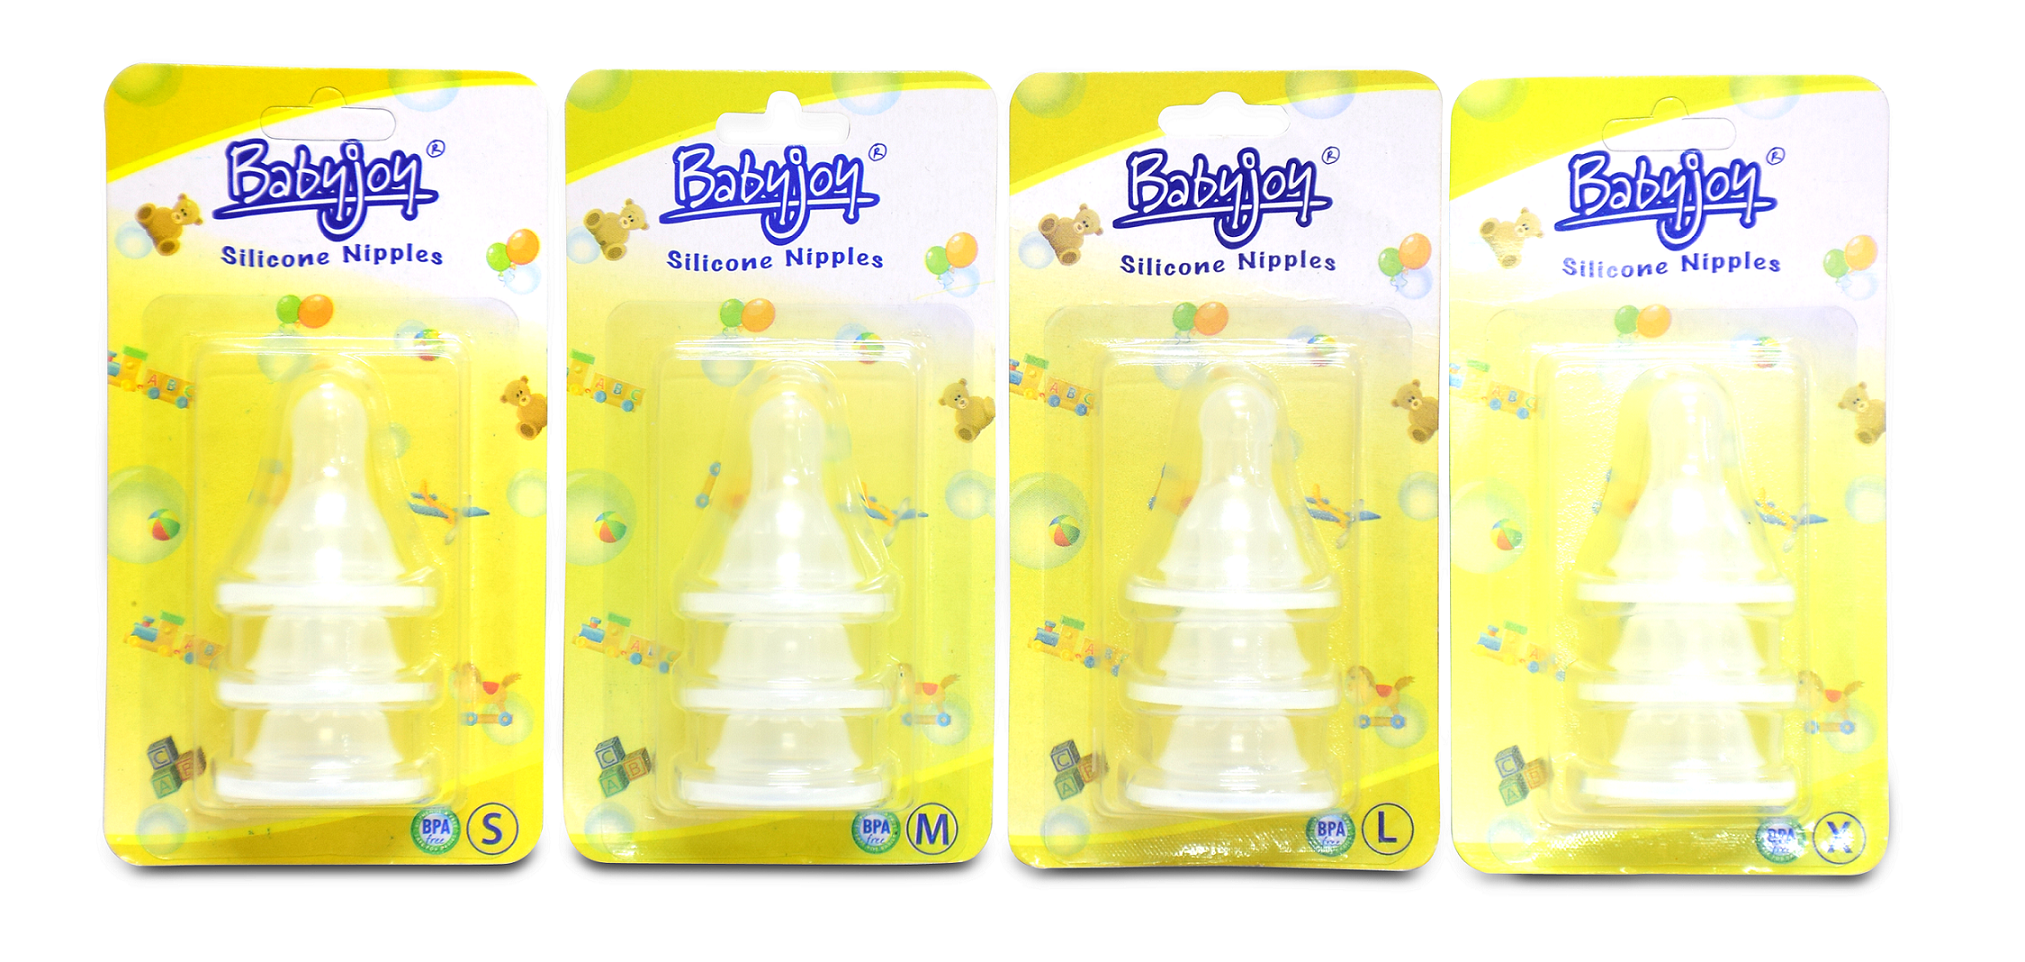 Nurture 3 pc Baby Joy Silicone Nipple In Blister Cards